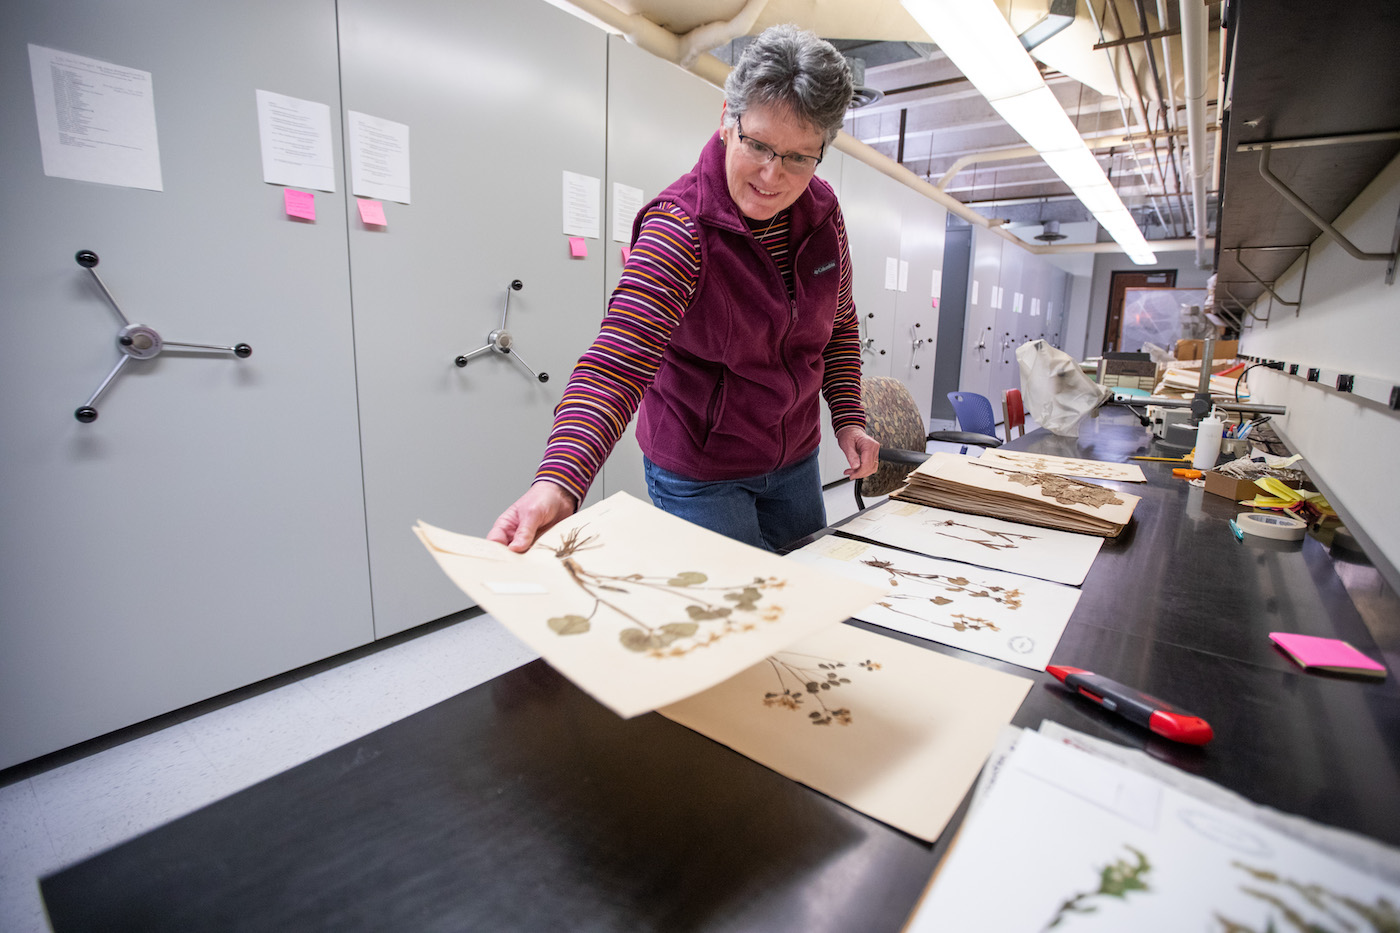 A woman is enthusiastically re-organizing papers with pressed plant samples on them.